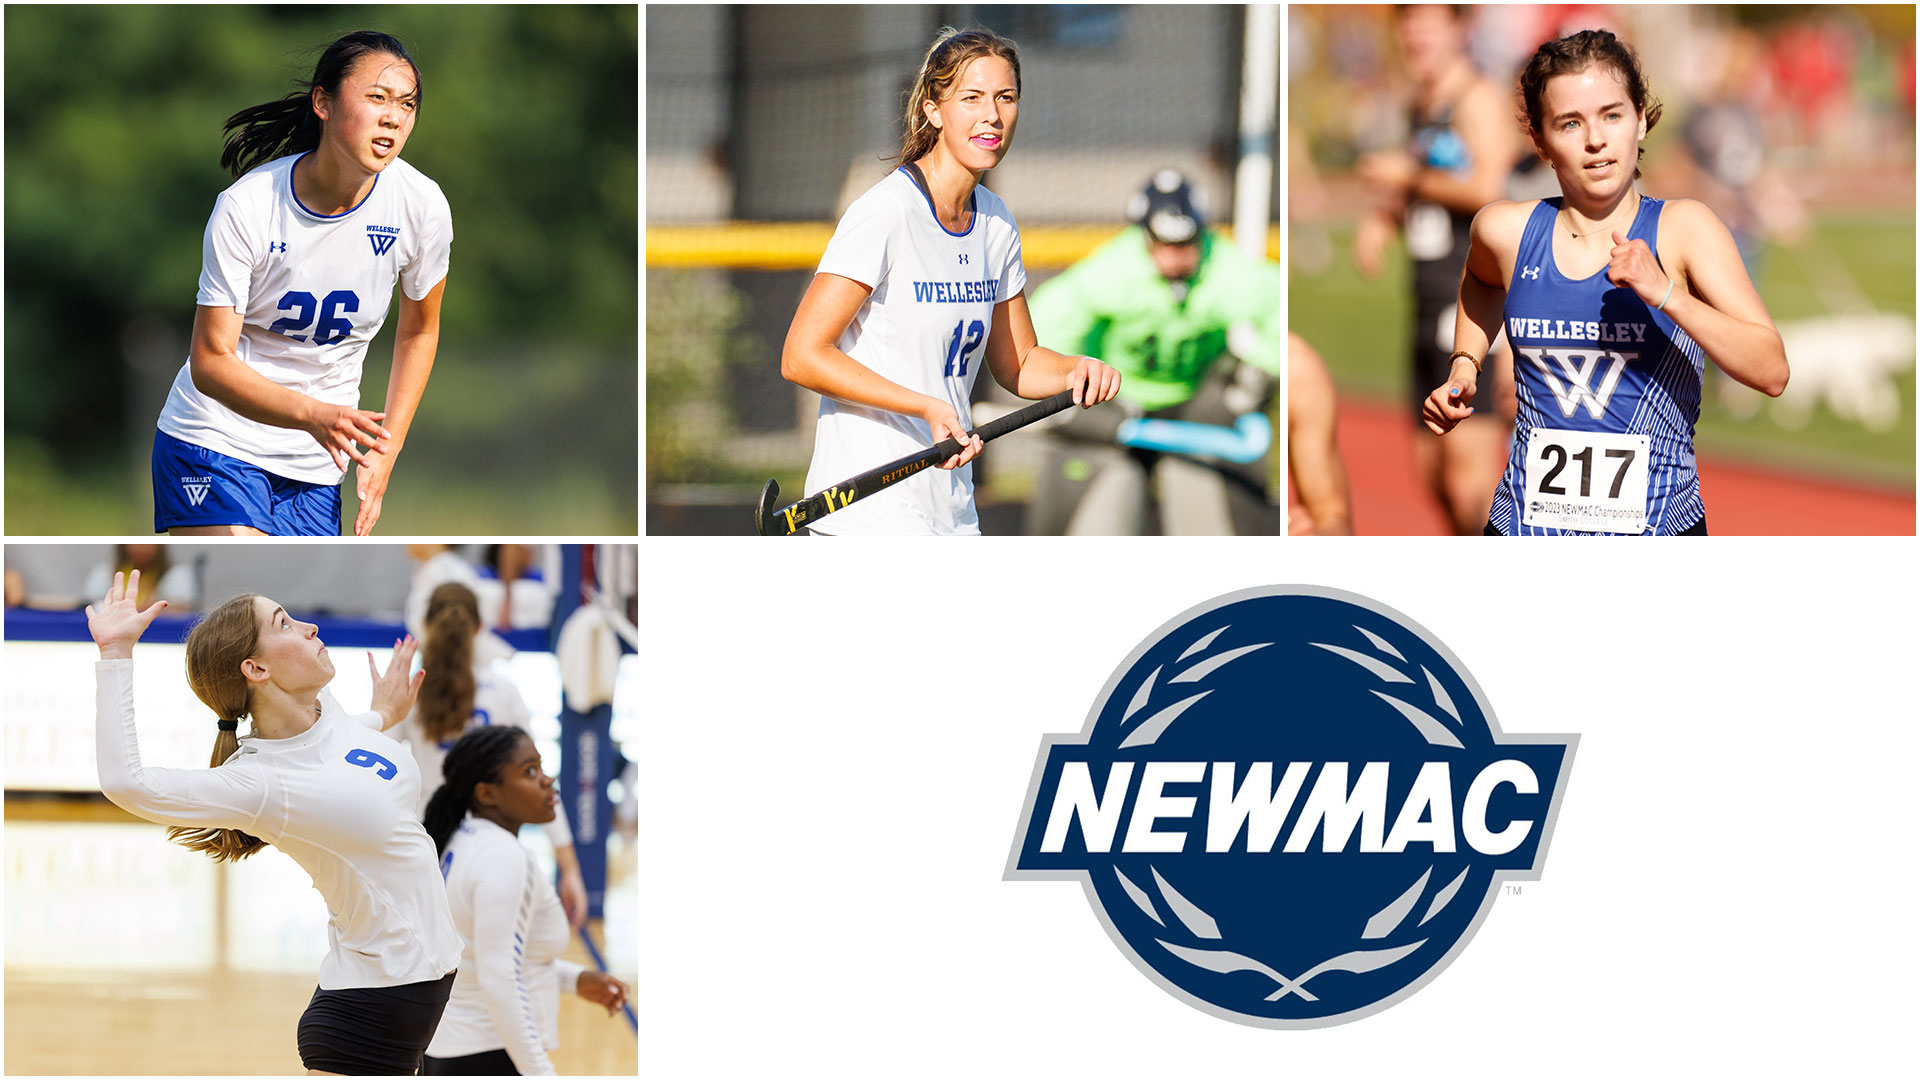 Four Named to NEWMAC Fall All-Sportsmanship Team